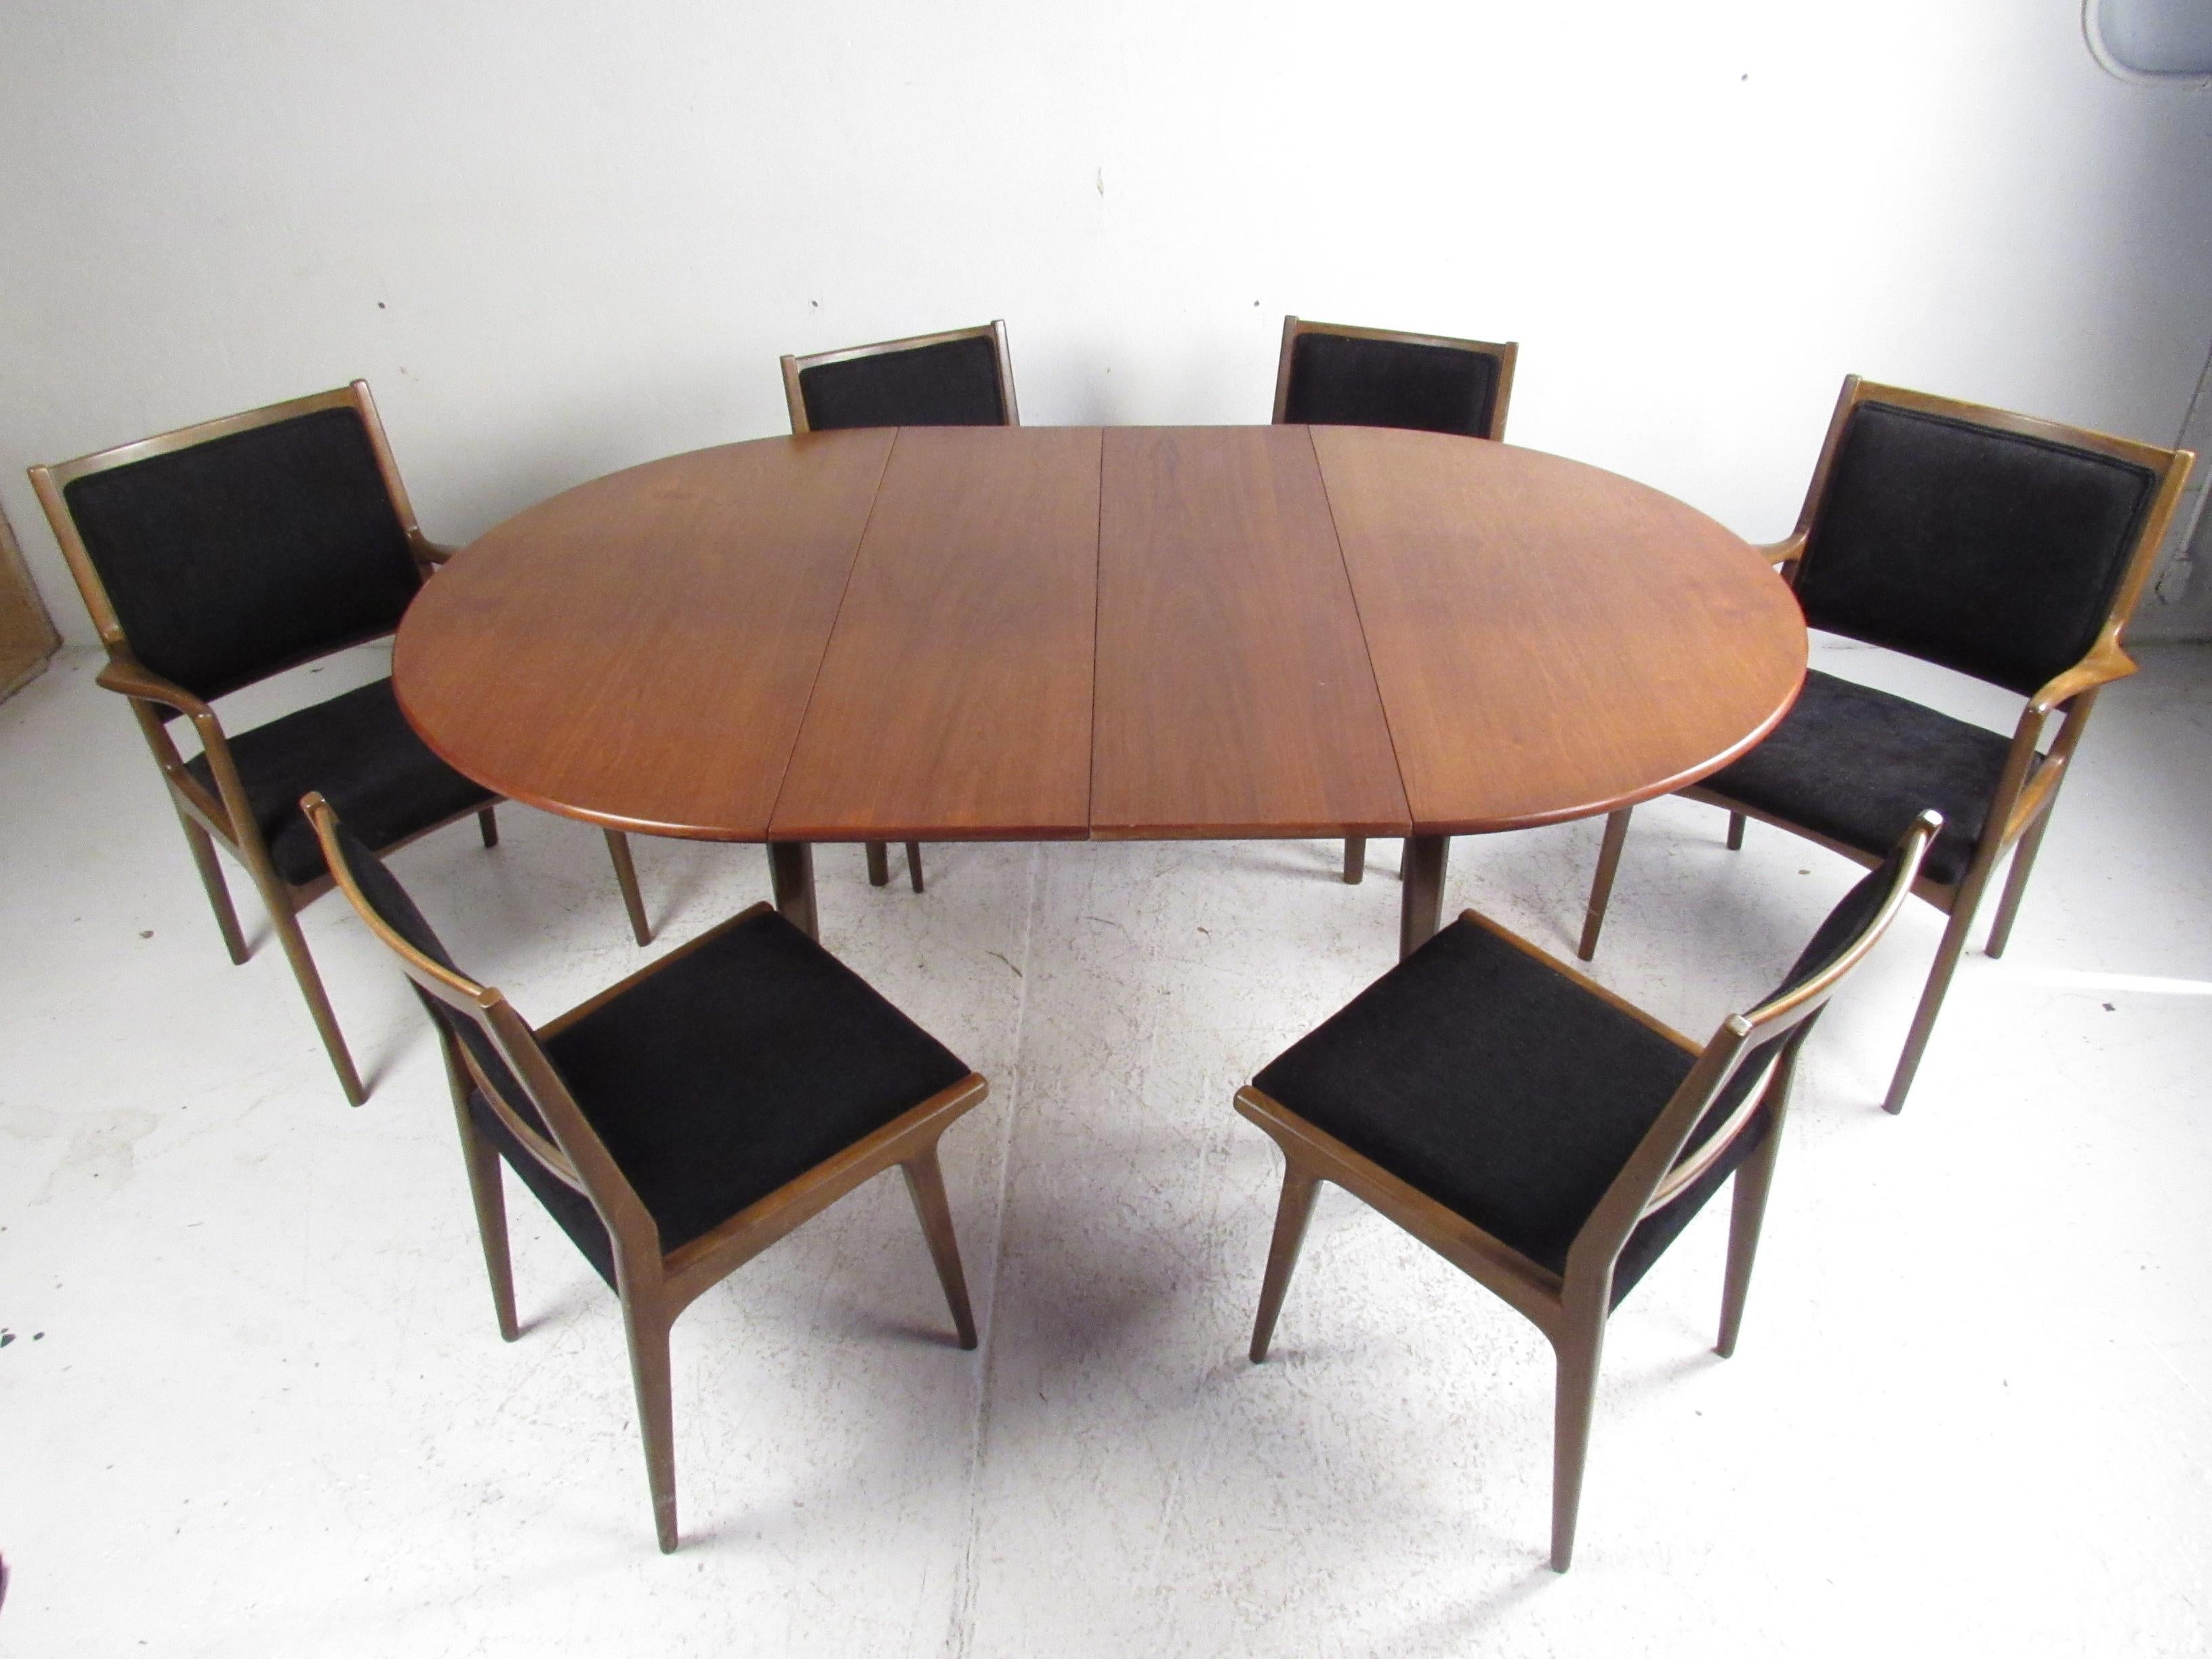 This stunning vintage modern dining set includes a dining table with two leaves, four dining chairs, and two arm chairs. An impressive design that boasts a round tabletop, long tapered legs, and stretchers for added sturdiness. The stylish set of